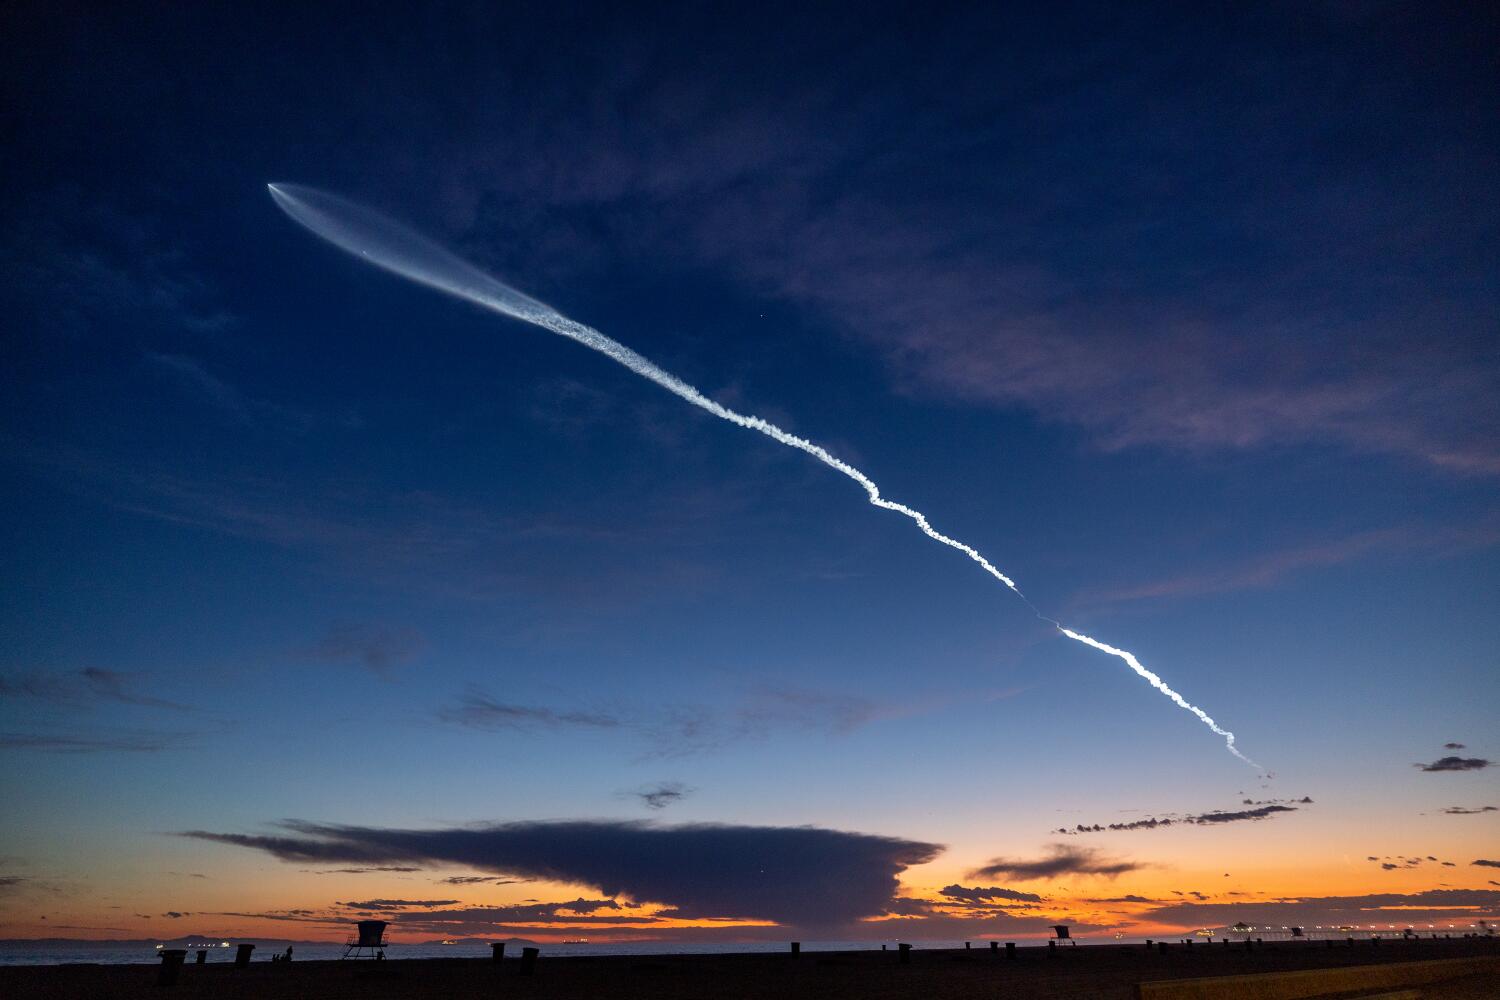 Look to the skies tonight for another SpaceX rocket launch